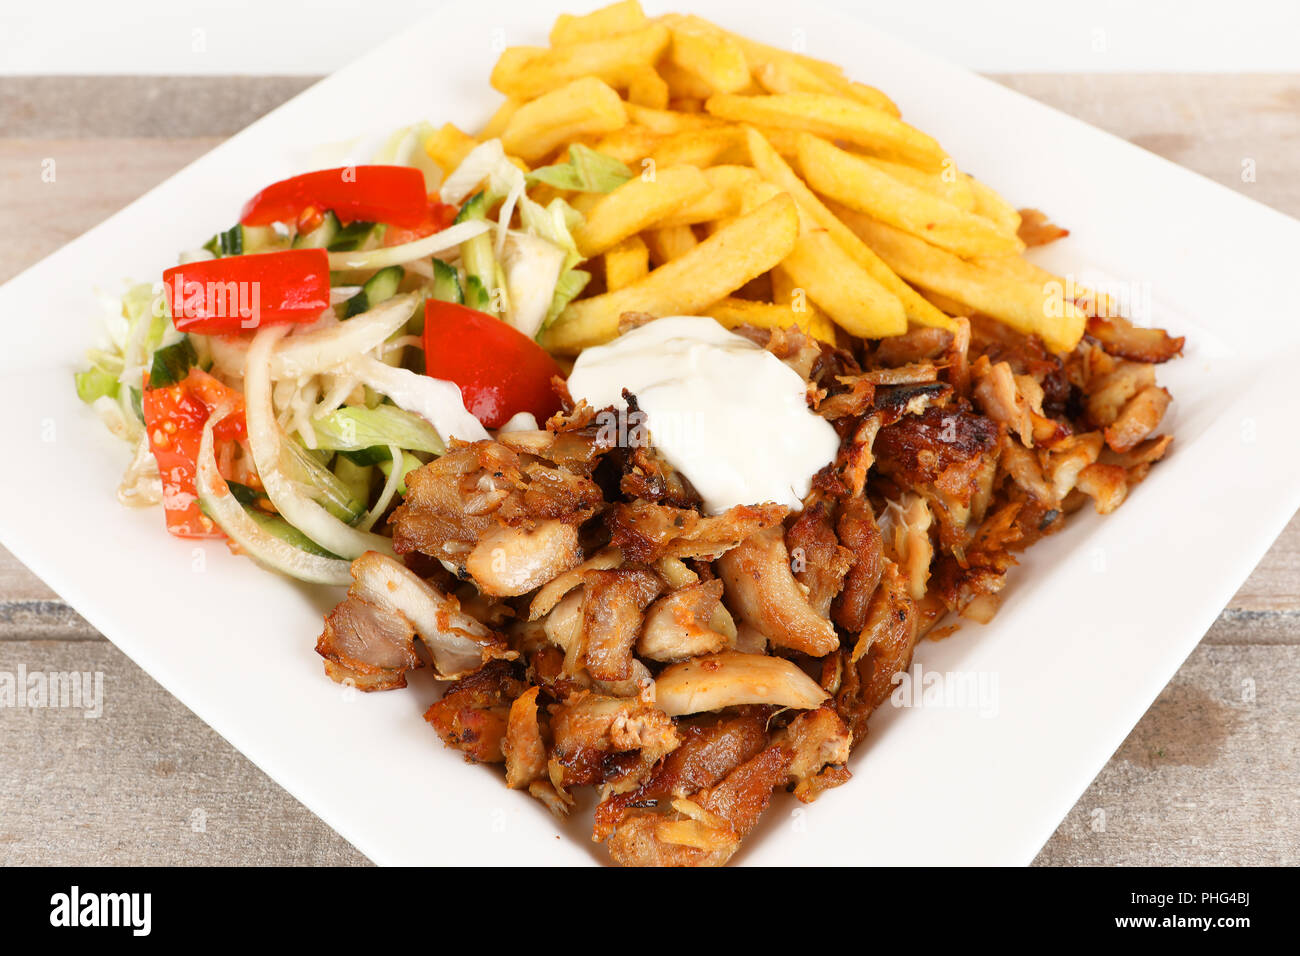 chicken doner with fries and salad Stock Photo